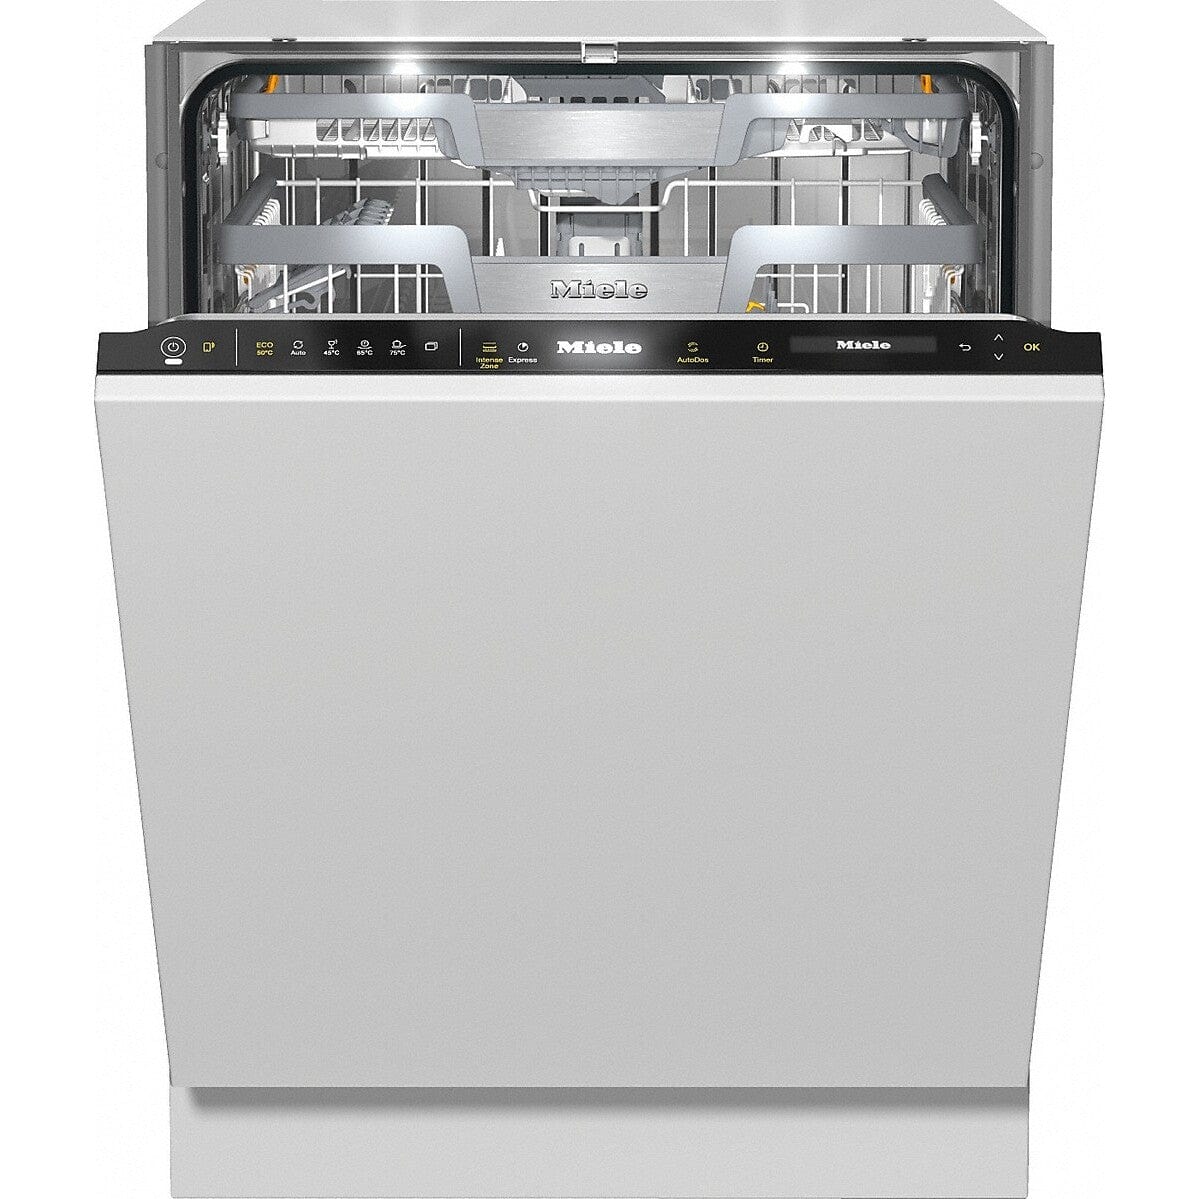 miele-g7590-scvi-k2o-autodos-built-in-fully-integrated-dishwasher-knock2open-327733_1280x